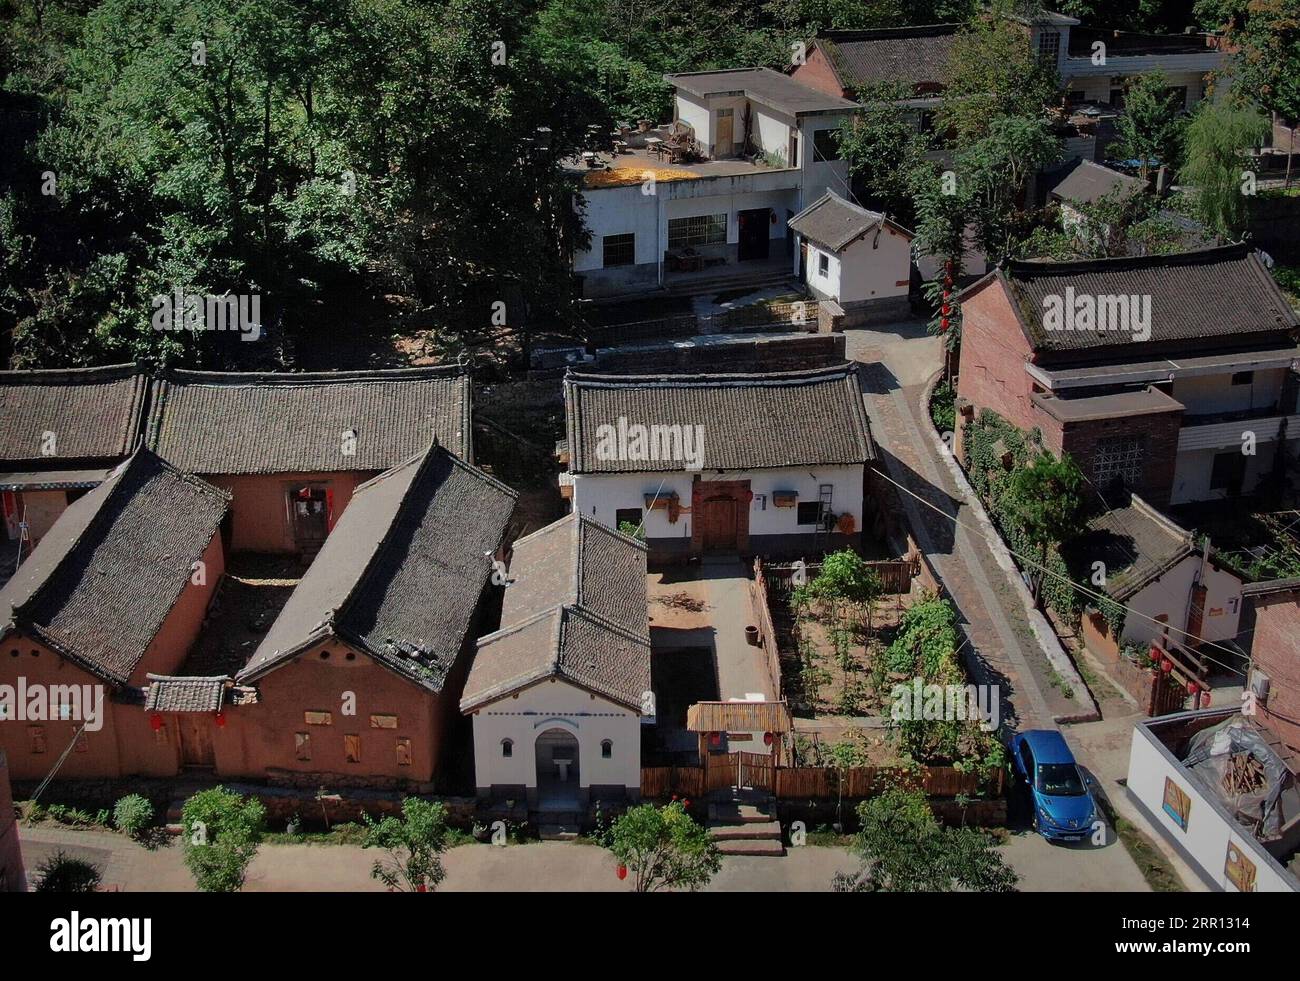 200902 -- SONGXIAN, Sept. 2, 2020 -- Aerial photo taken on Sept. 2, 2020 shows some renovated houses in Dawanggou Village in Deting Town of Songxian County, Luoyang City, central China s Henan Province. Dawanggou Village, located in a mountainous area, used to be an impoverished village. In recent years, the local government has made efforts in improving the living conditions of the villagers, carrying out relocation and renovation work. By improving the appearance of the village, rural tourism has been developed, which helps people here get rid of poverty without working far away from home. Stock Photo